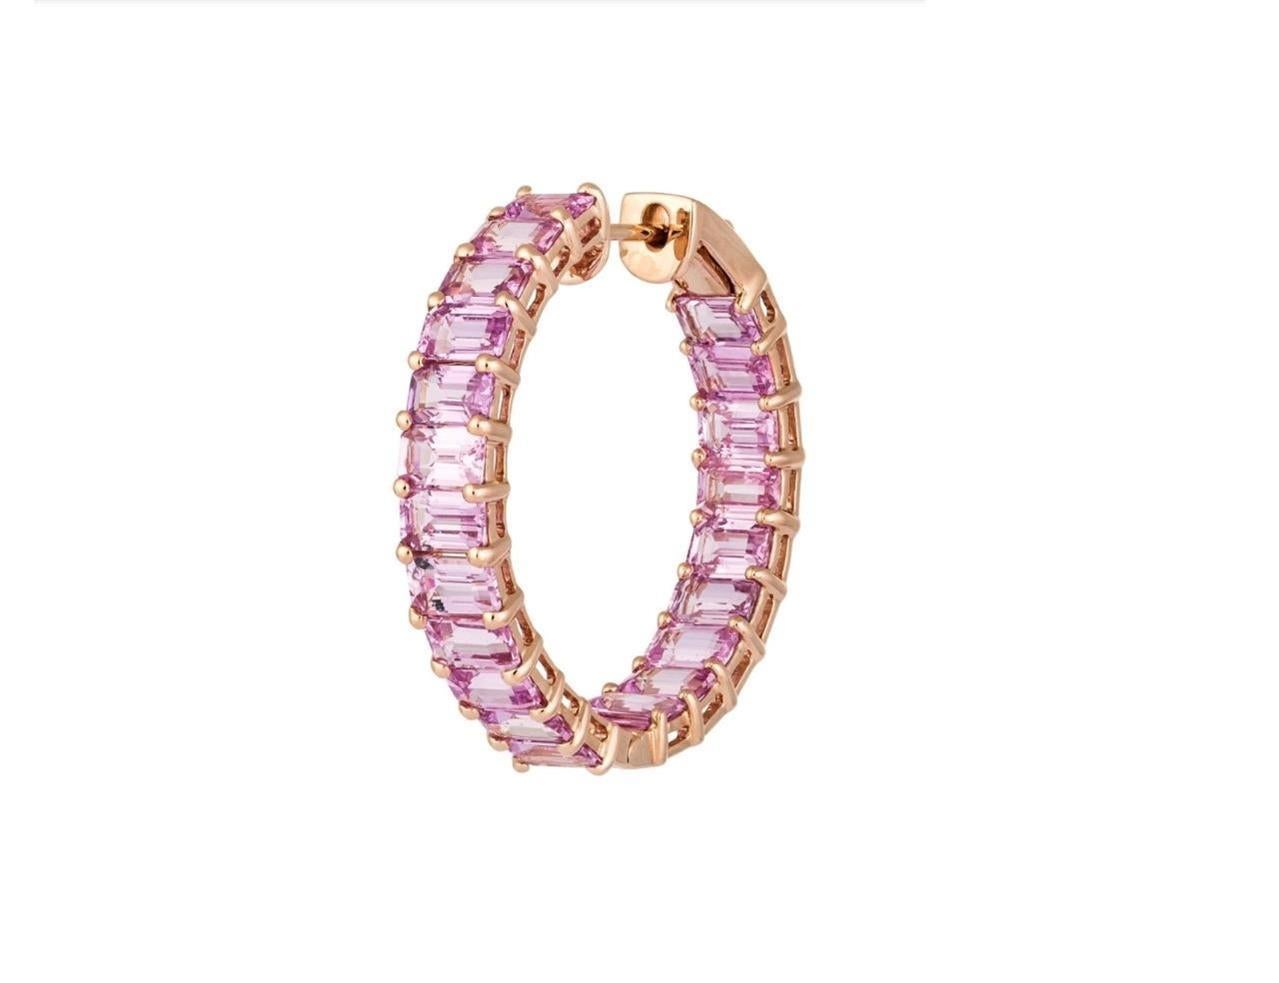 The Following Items we are offering is this Rare Important Radiant 18KT Gold Gorgeous Glittering and Sparkling Magnificent Fancy Emerald Cut Pink Sapphire Hoop Earrings. Earrings contain approx 14CTS of Beautiful Fancy Emerald Cut Pink Sapphires!!!